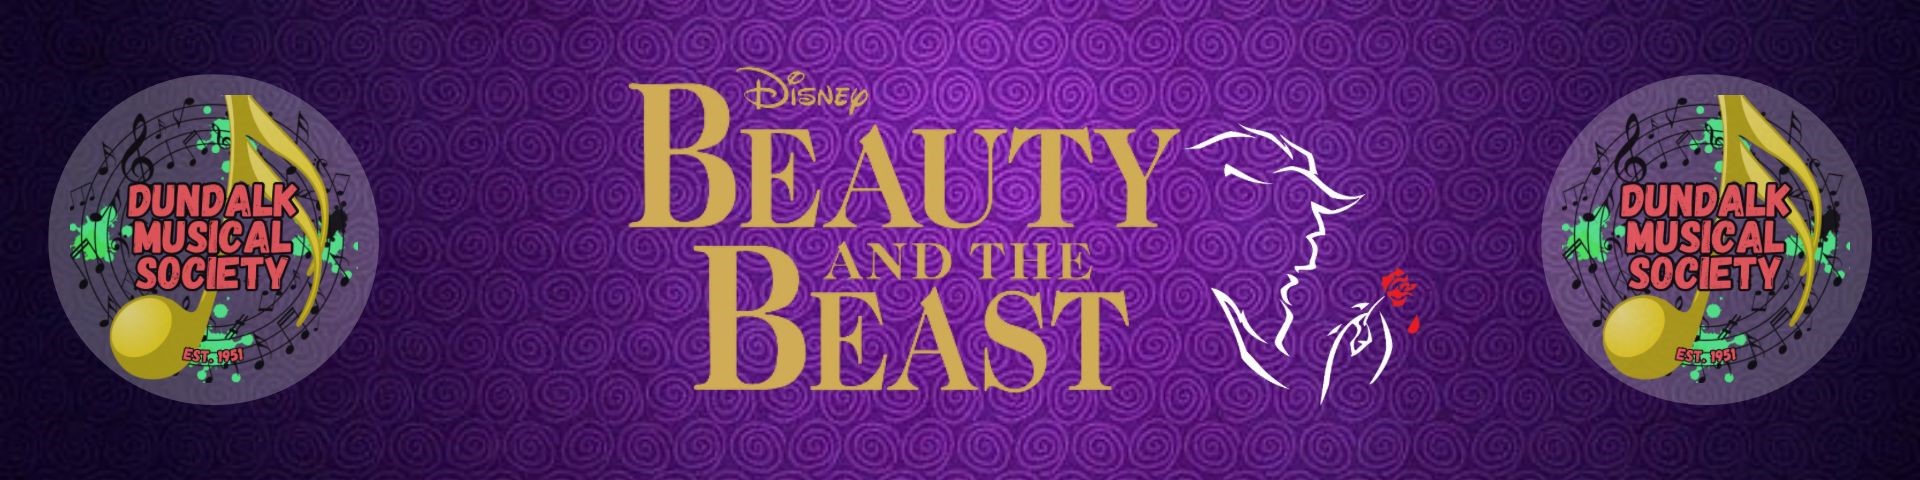 Swirly purple background with Disney Beauty and the Beast in gold lettering. The Dundalk Musical Society's music note logo is to the far right and left